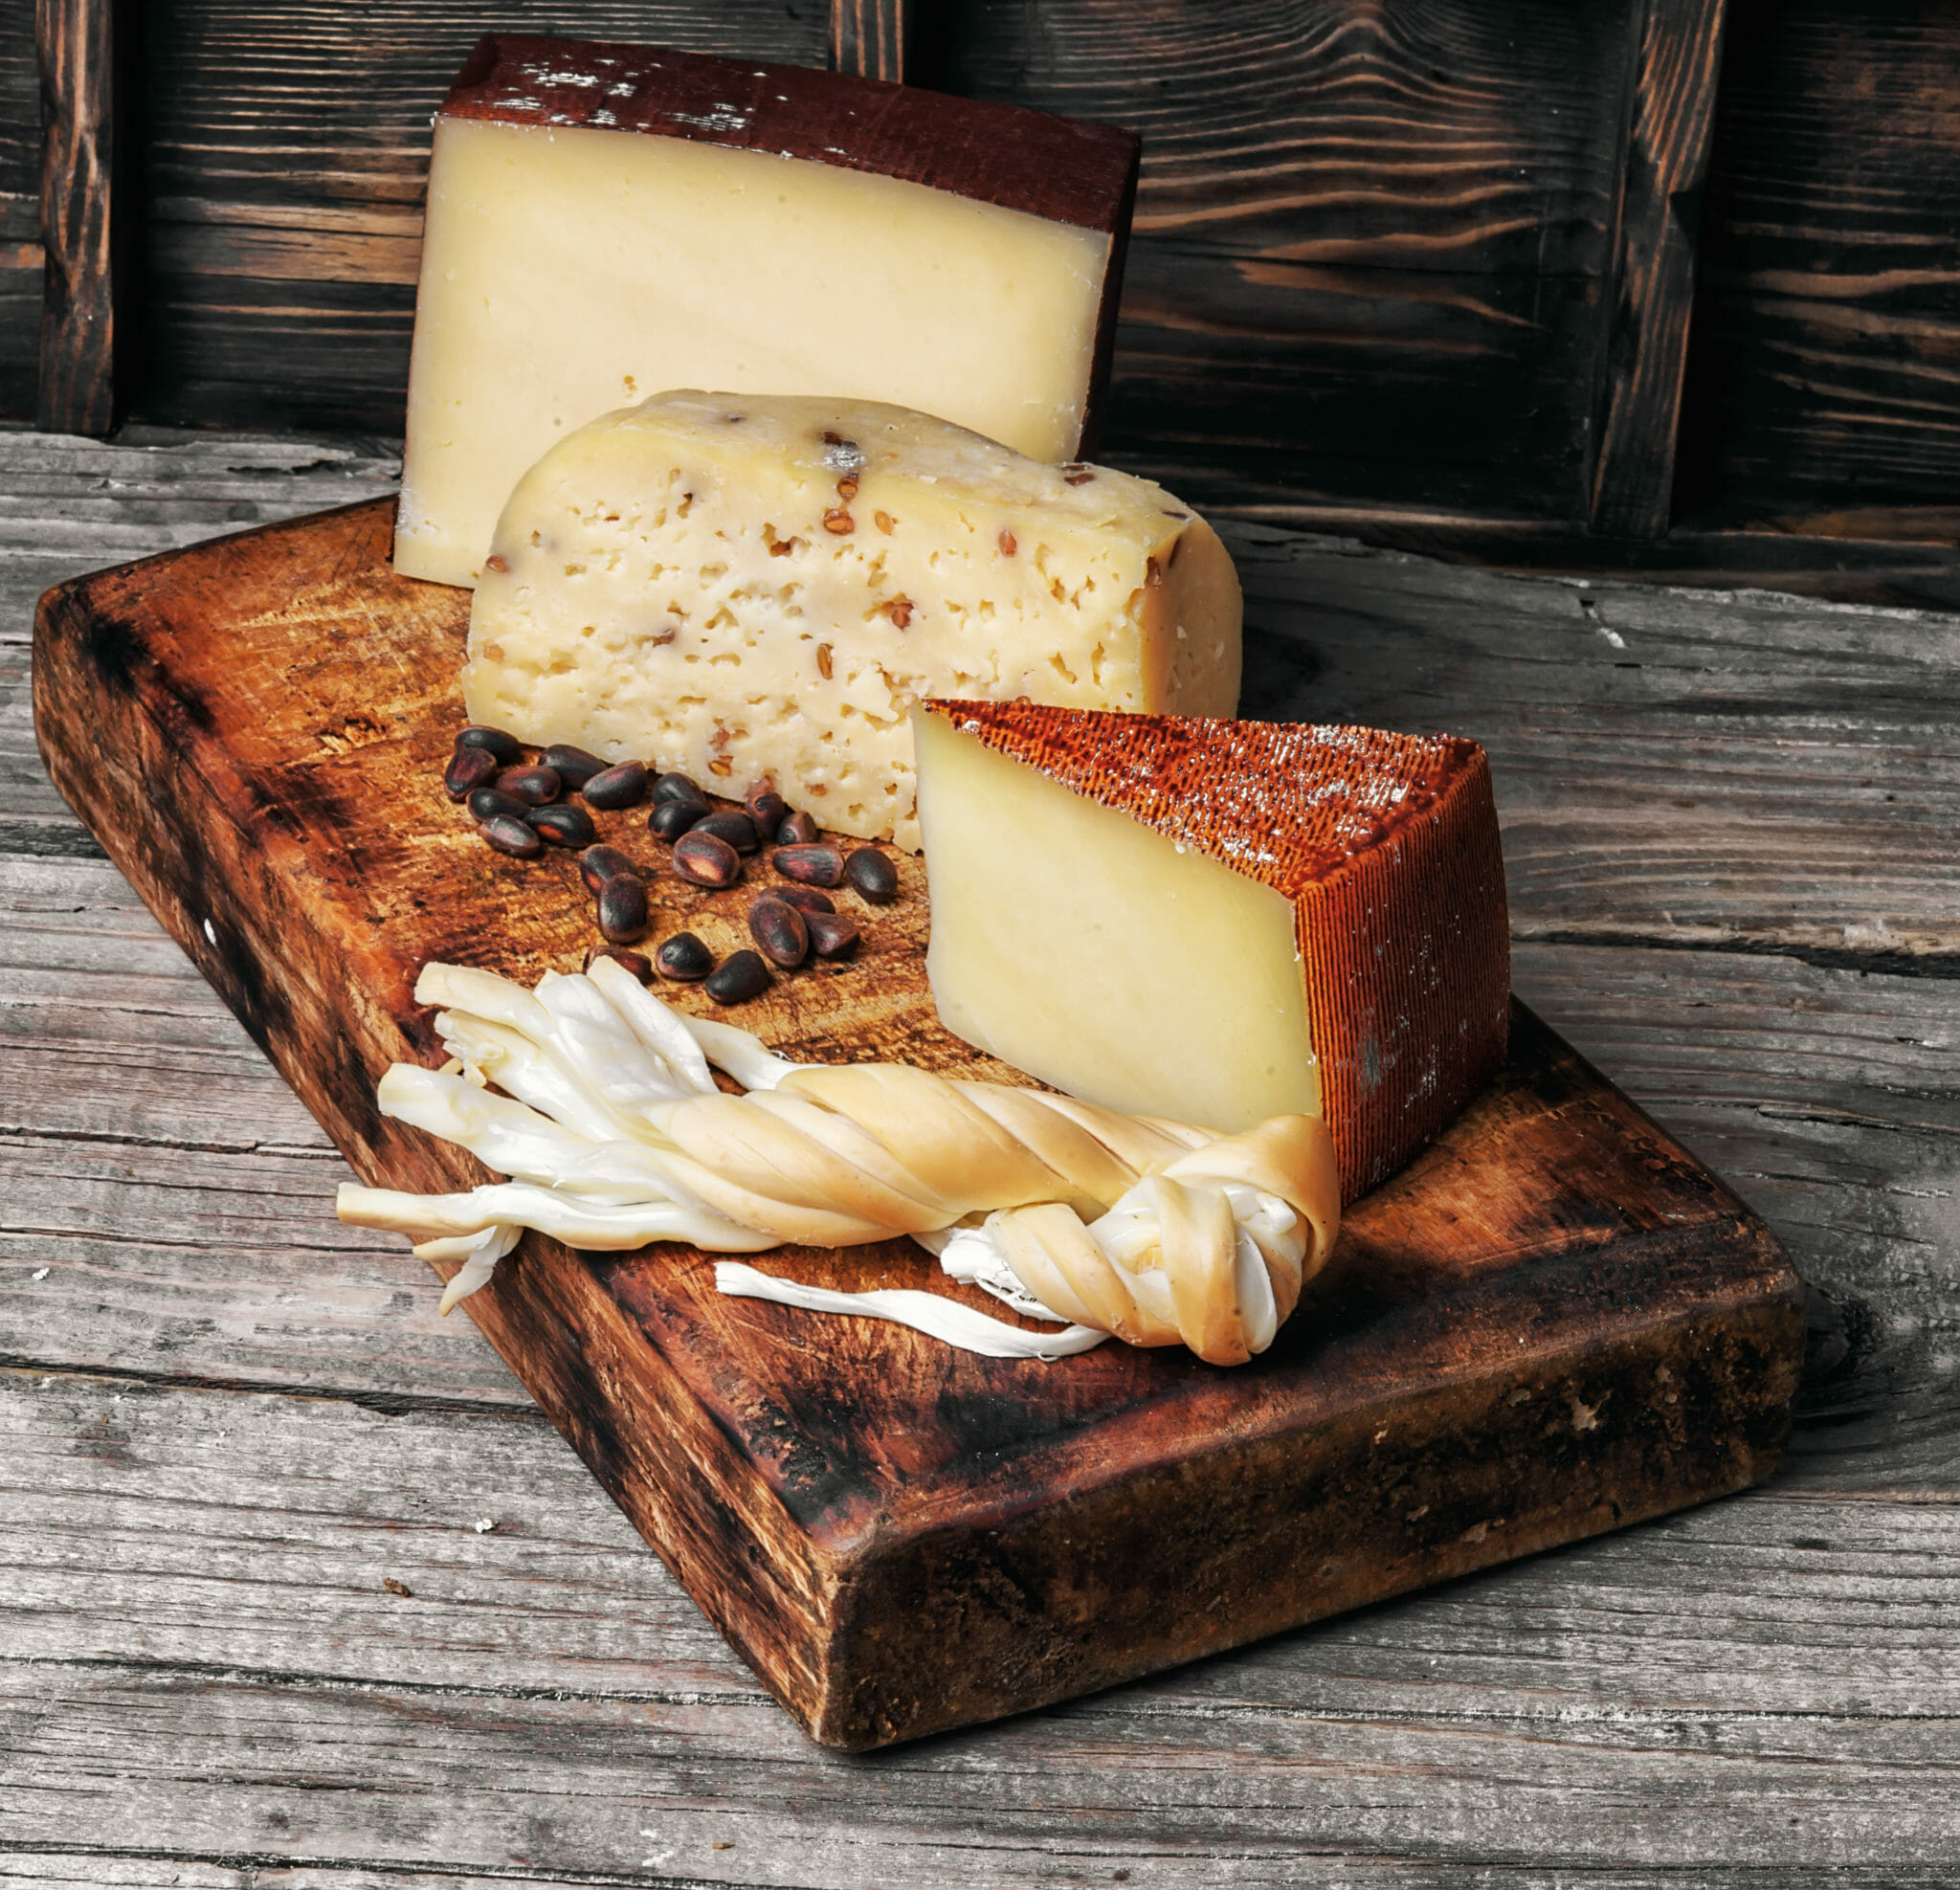 Range of three Swiss cheeses on a rustic, charred wooden cutting board.